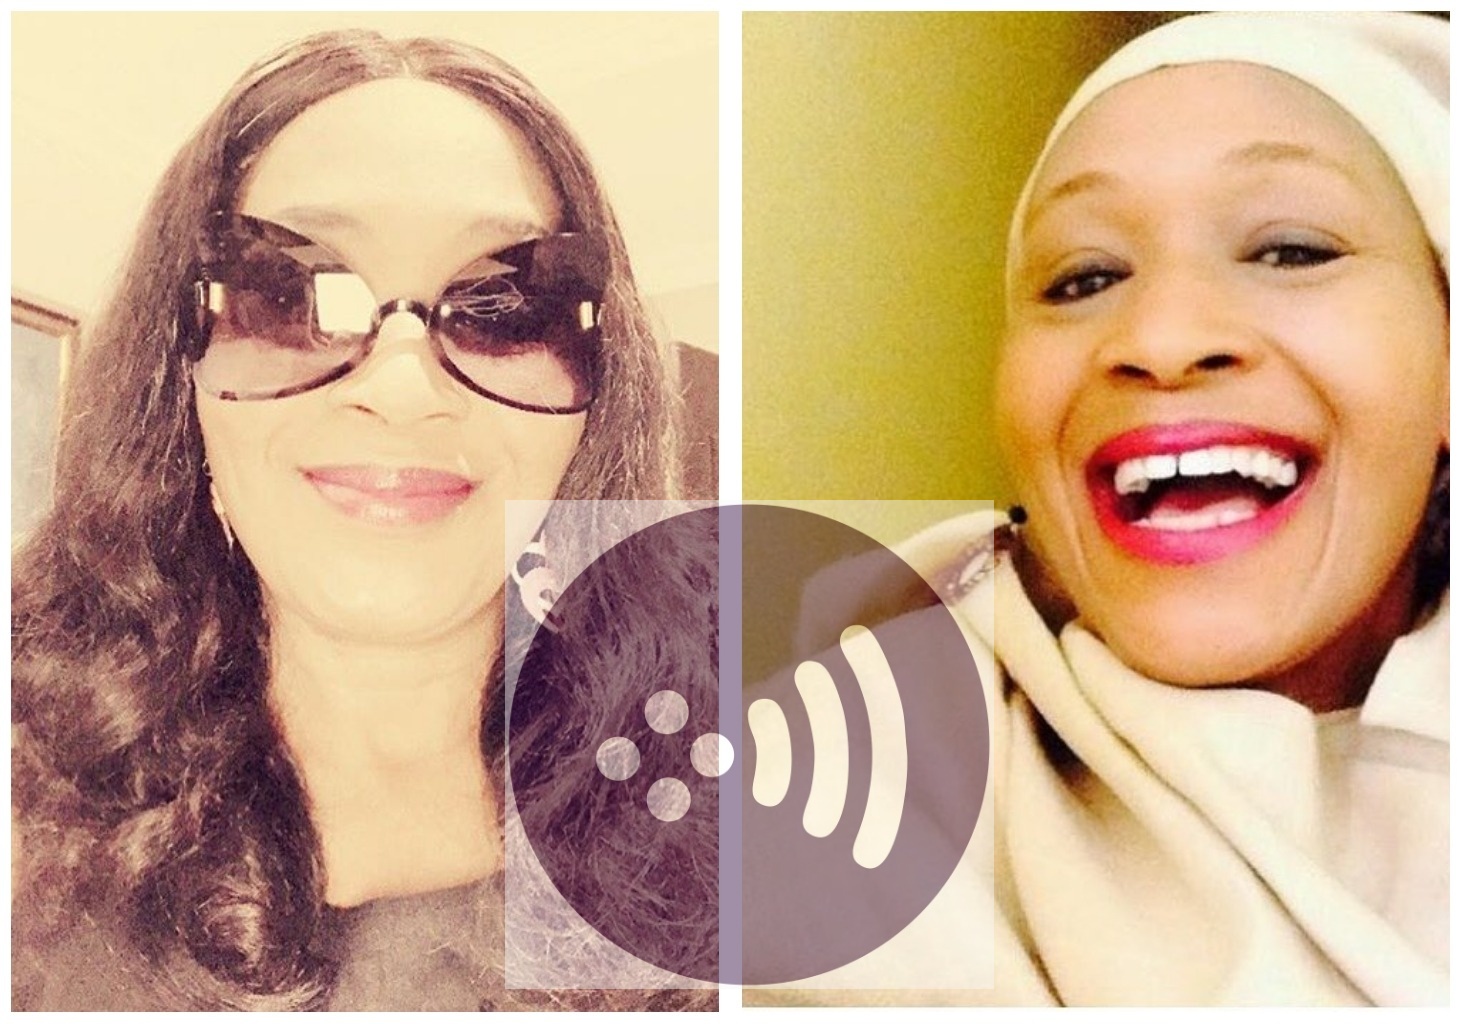 "I chased away Estate agents who visited me without face mask" – Kemi Olunloyo